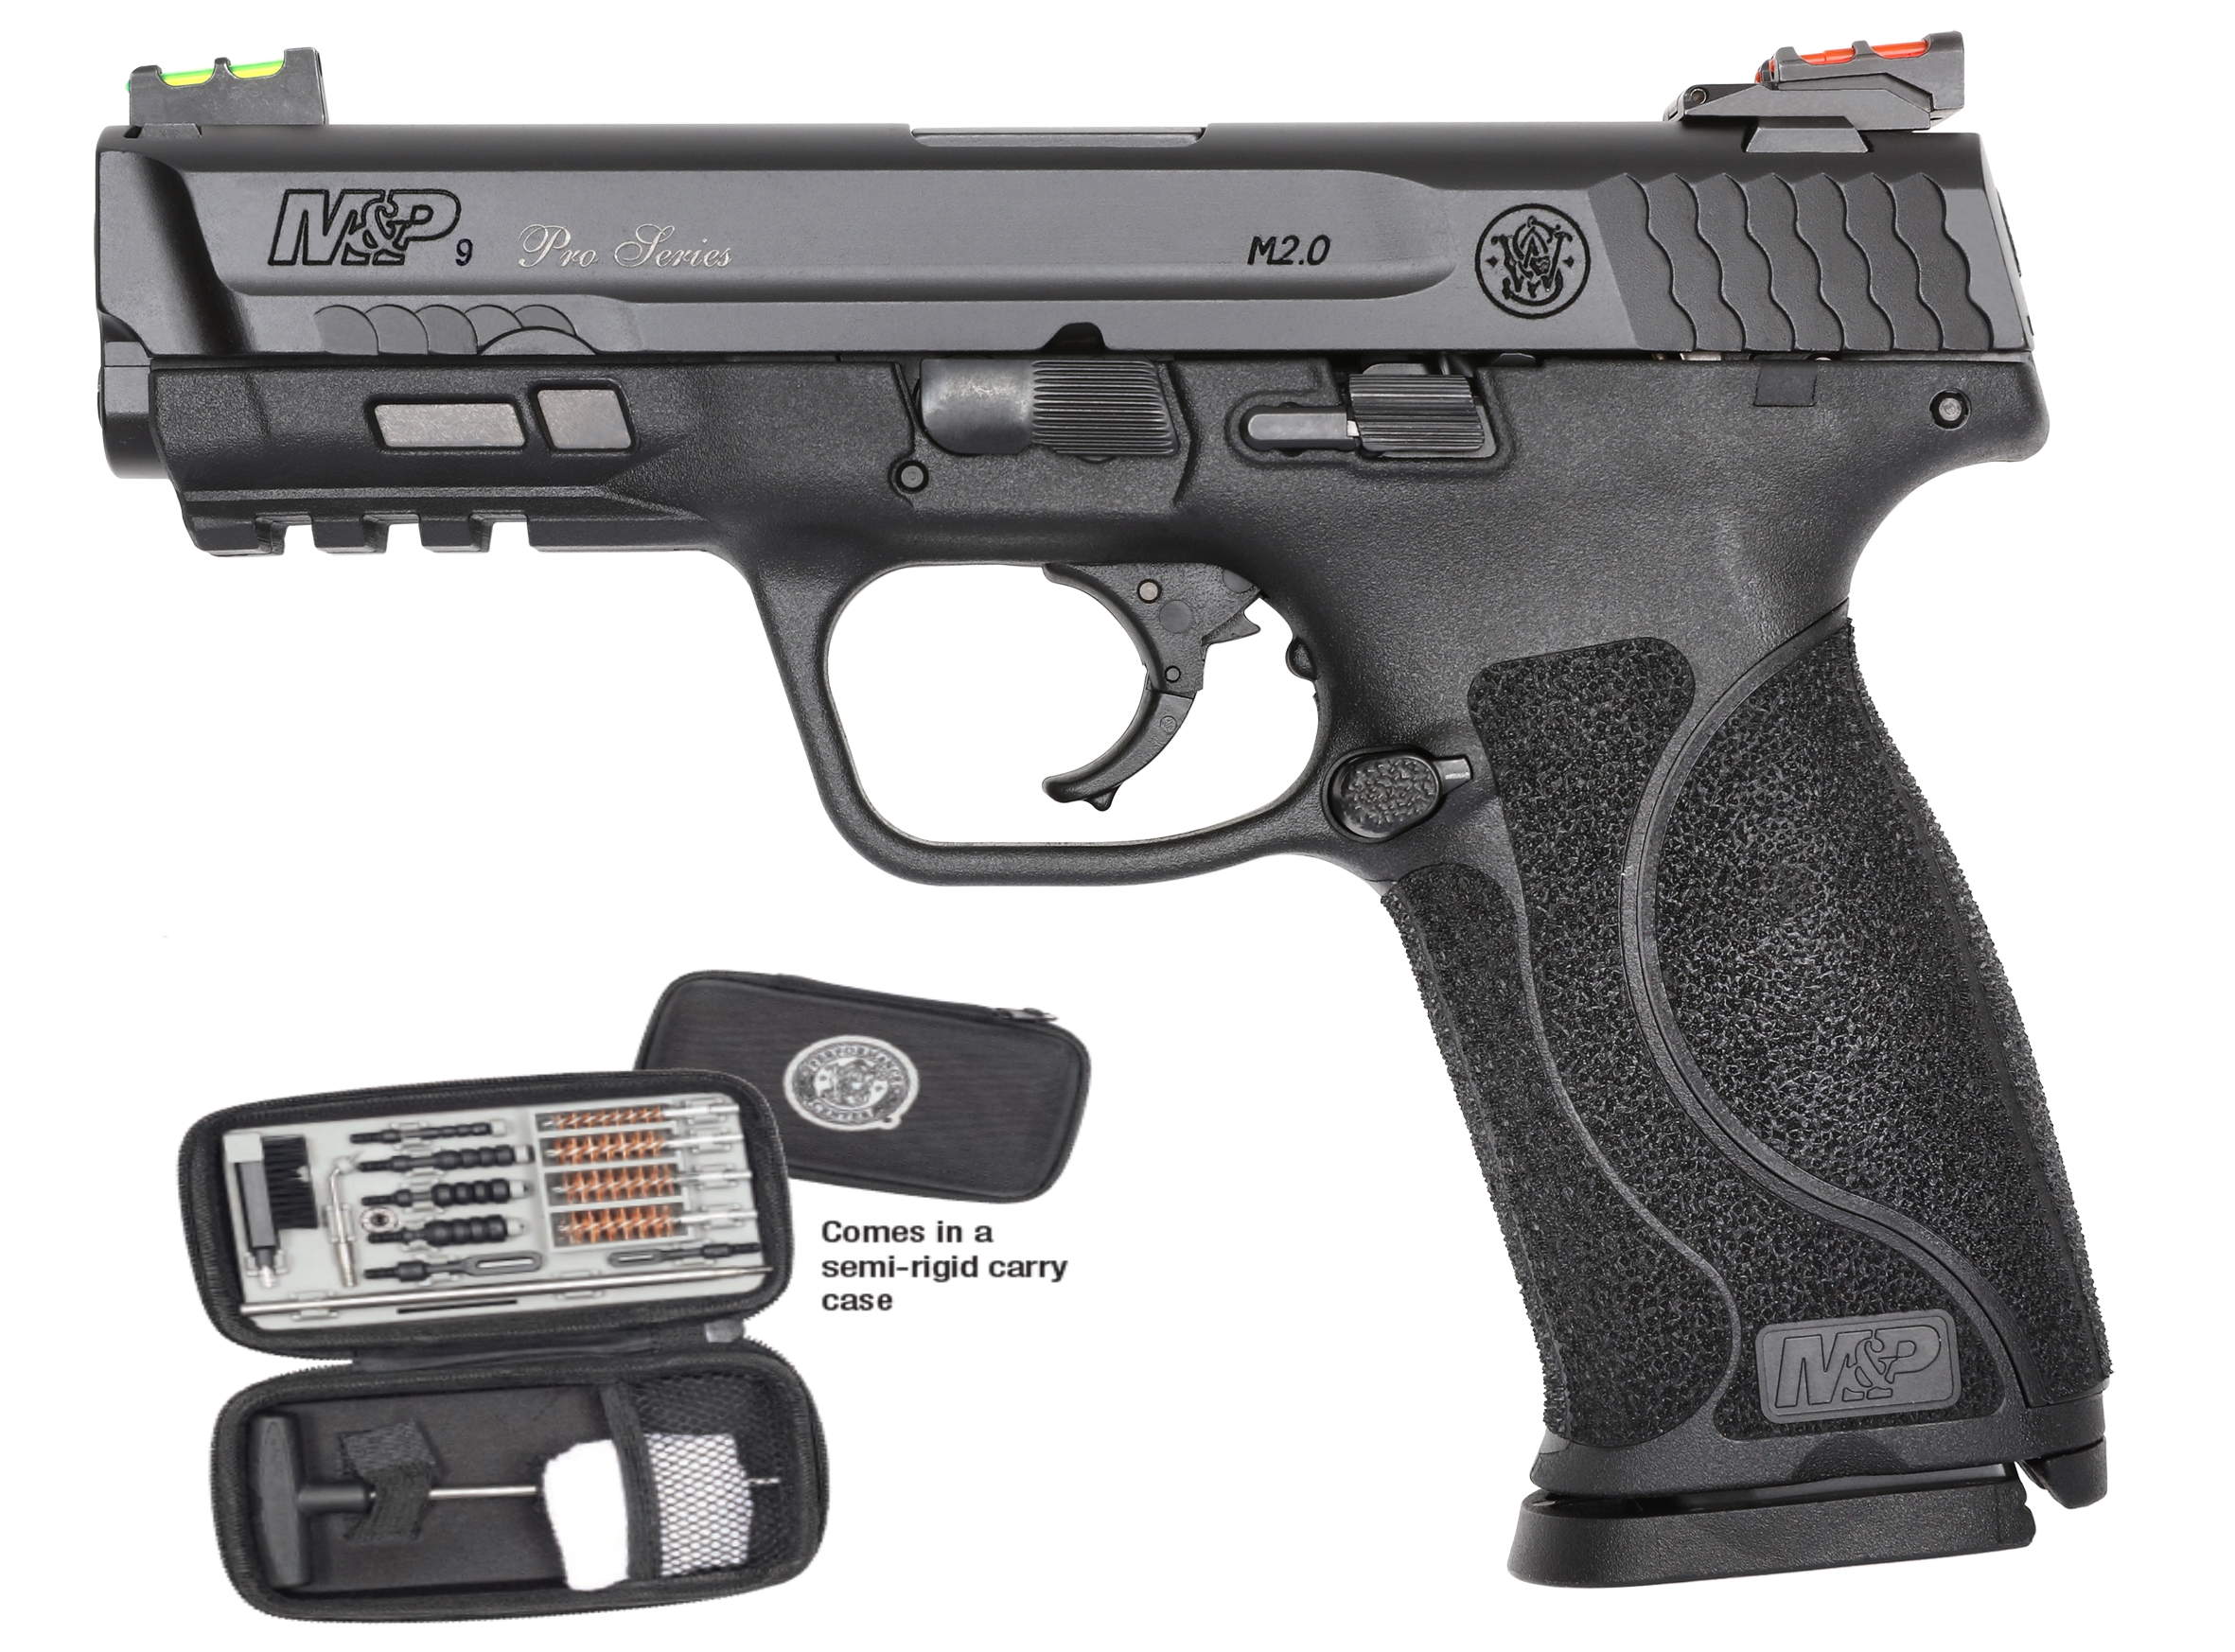 smith-wesson-smith-and-wesson-m-p-9mm-pistol-4-25-2-0-pro-series